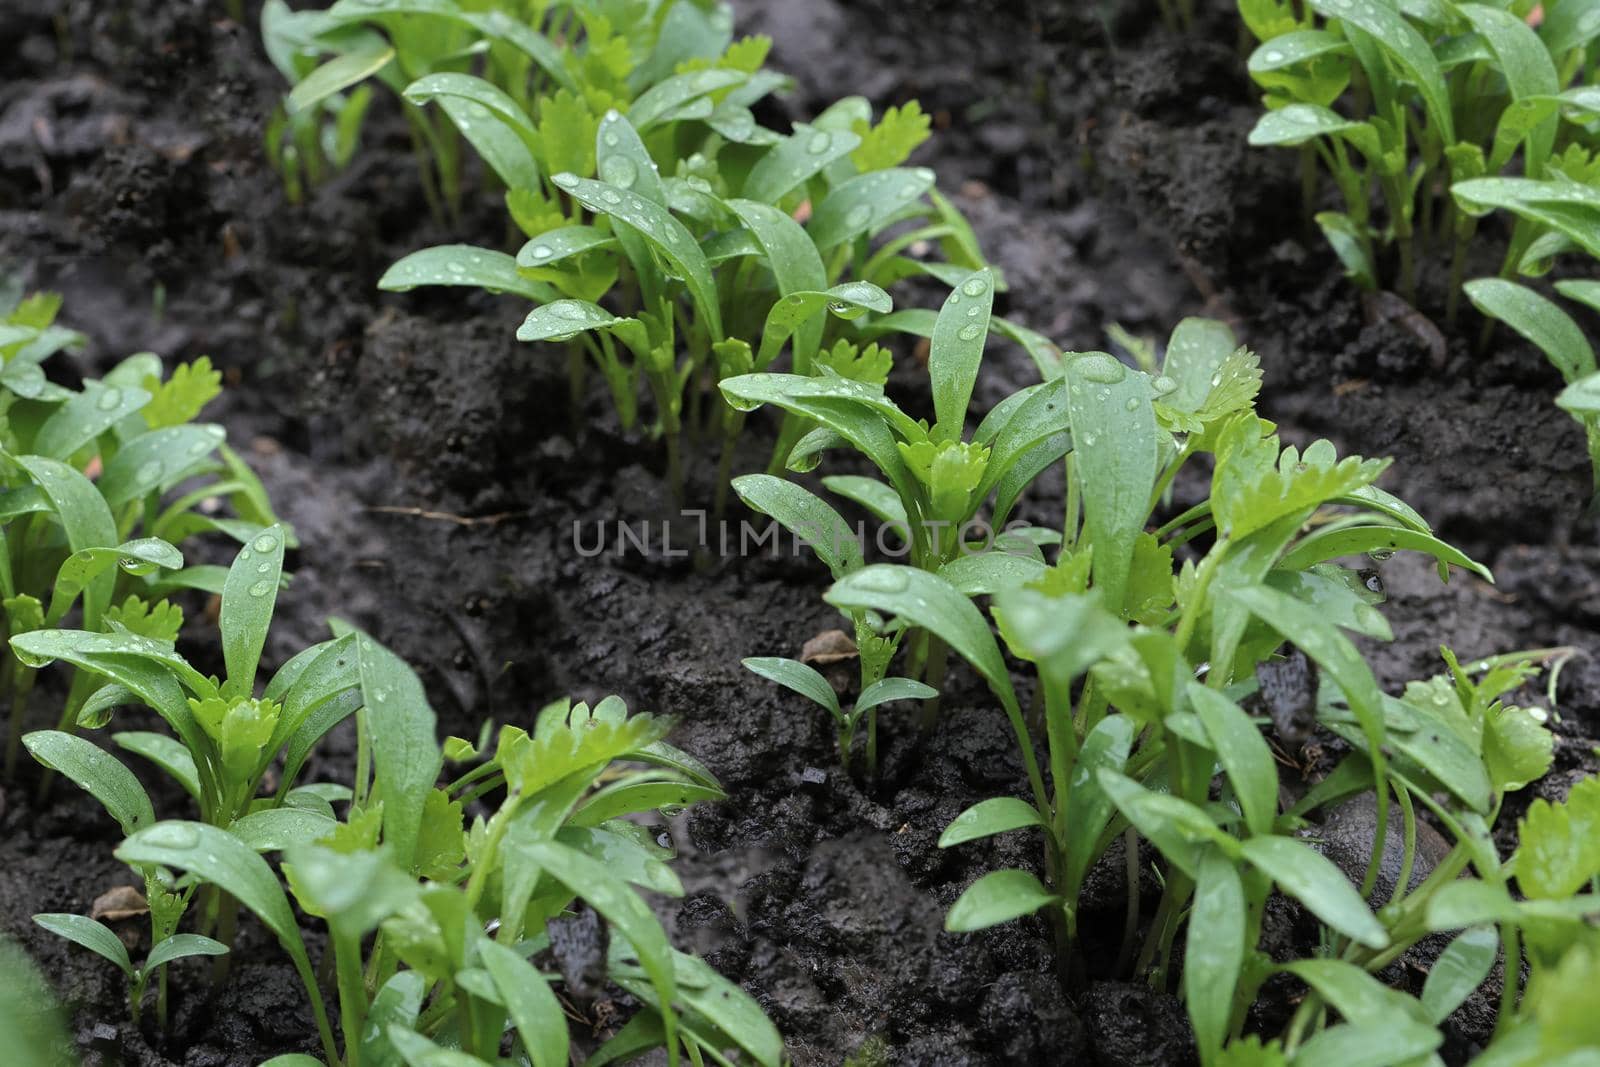 young greenery in the garden. Rows of green spinach, chard, lettuce on a vegetable patch. high quality photo